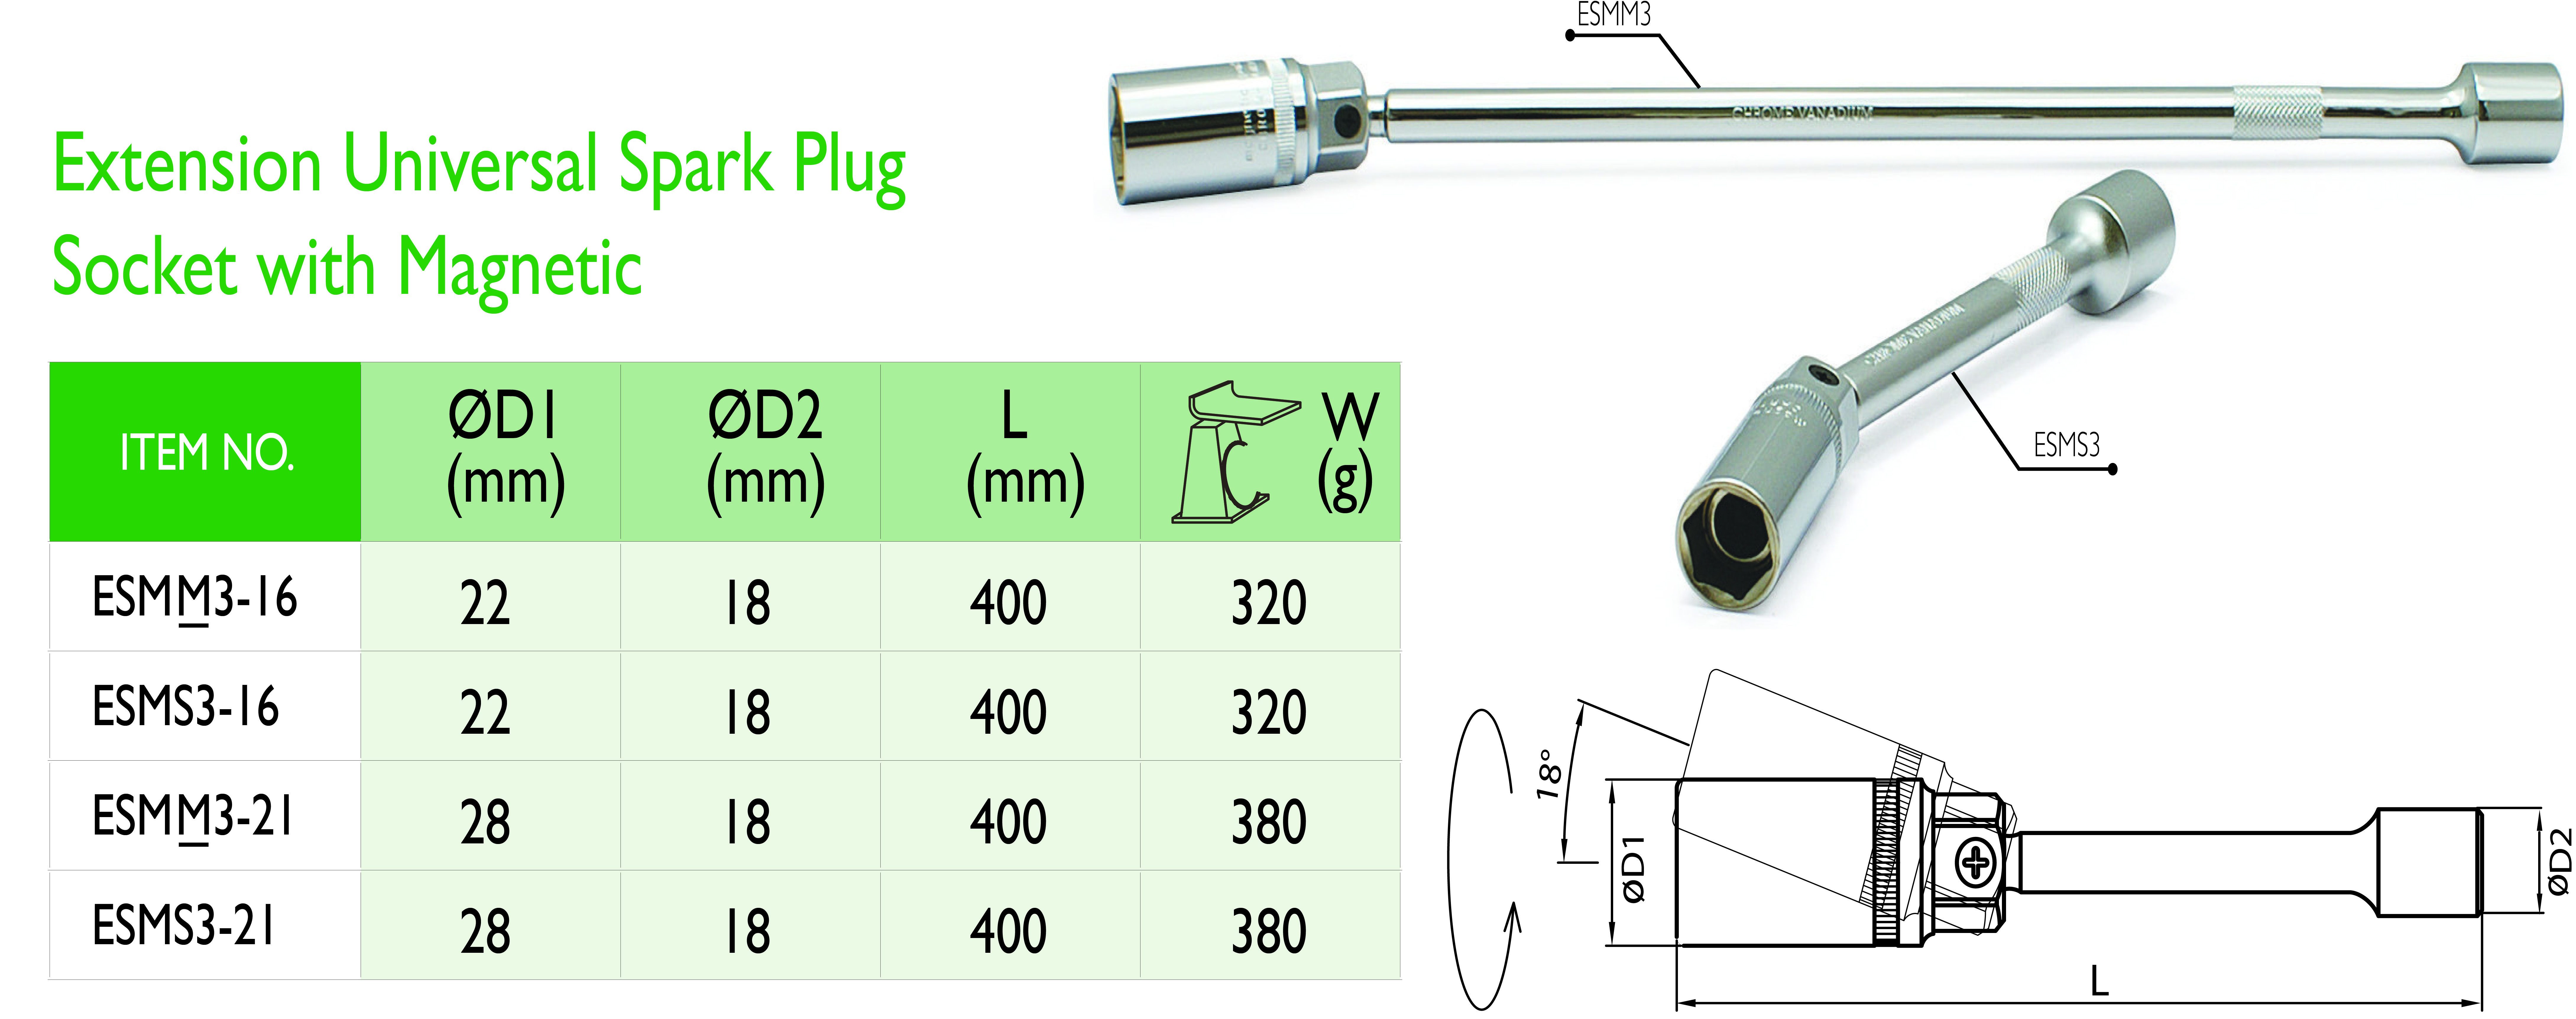 3_38 Extension Universal Spark Plug Socket with Magnetic_A.jpg